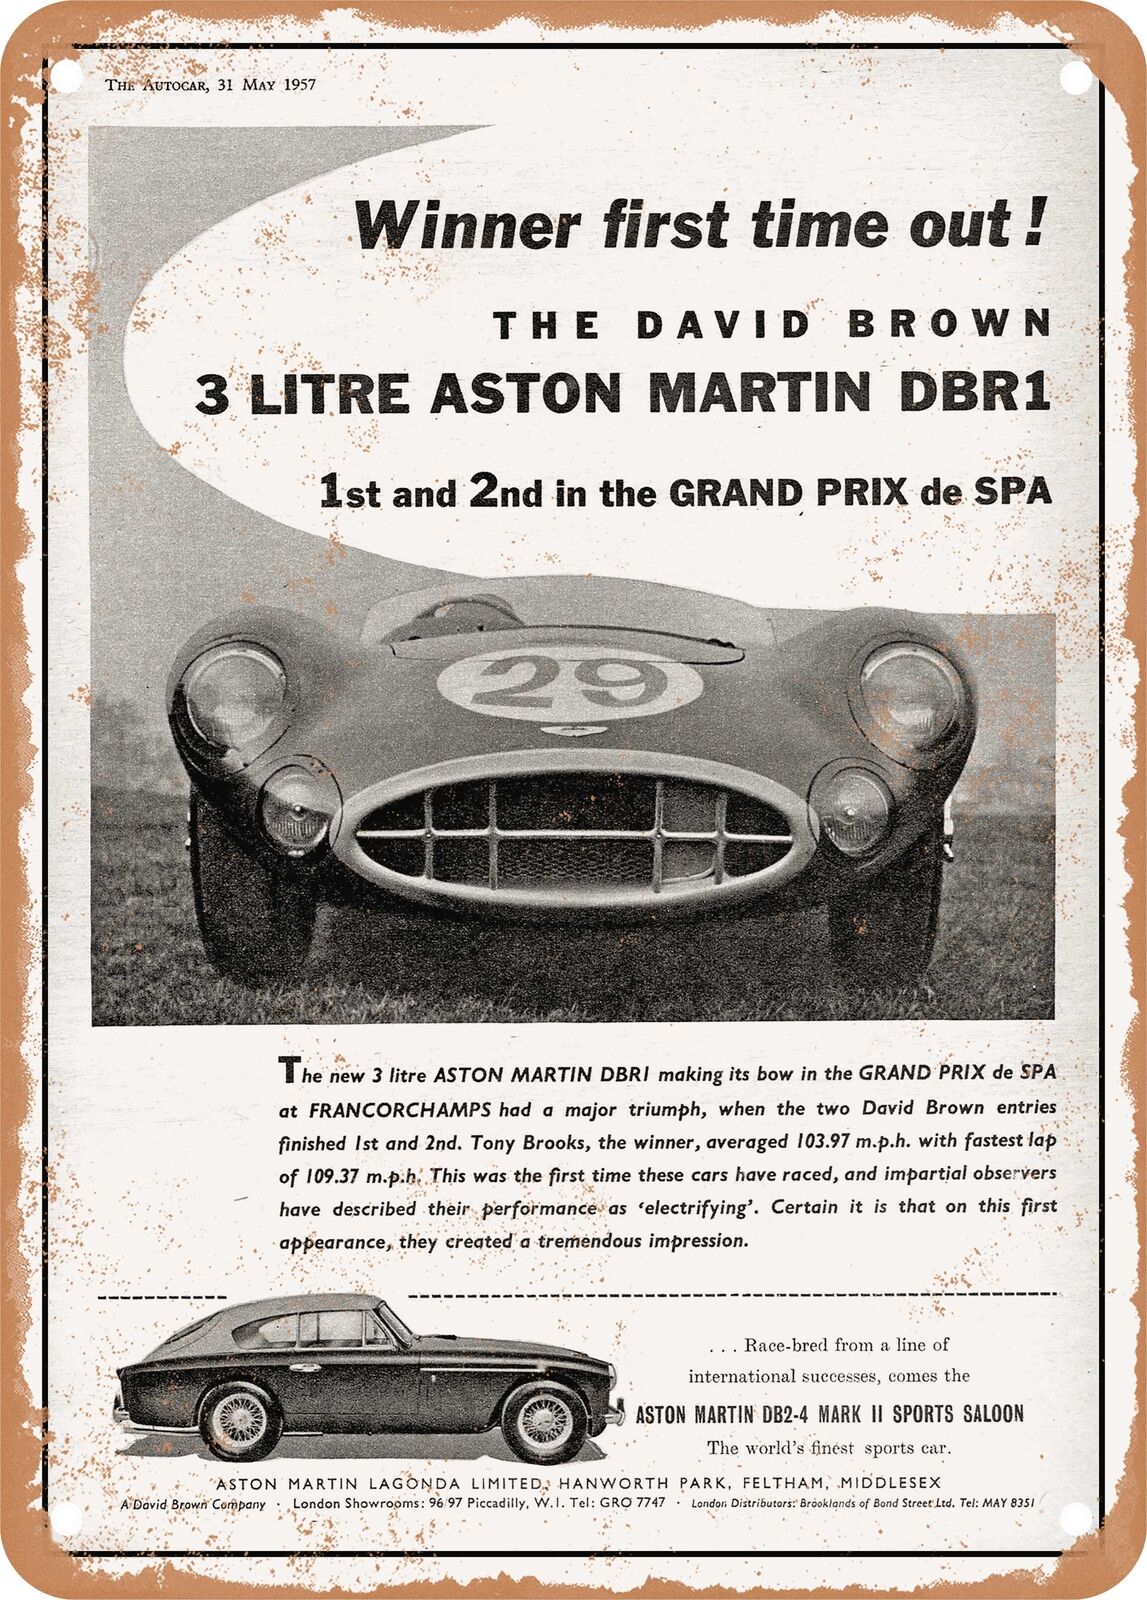 METAL SIGN - 1957 Aston Martin DBr1 DB2 4 Winner First Time Out Vintage Ad 2